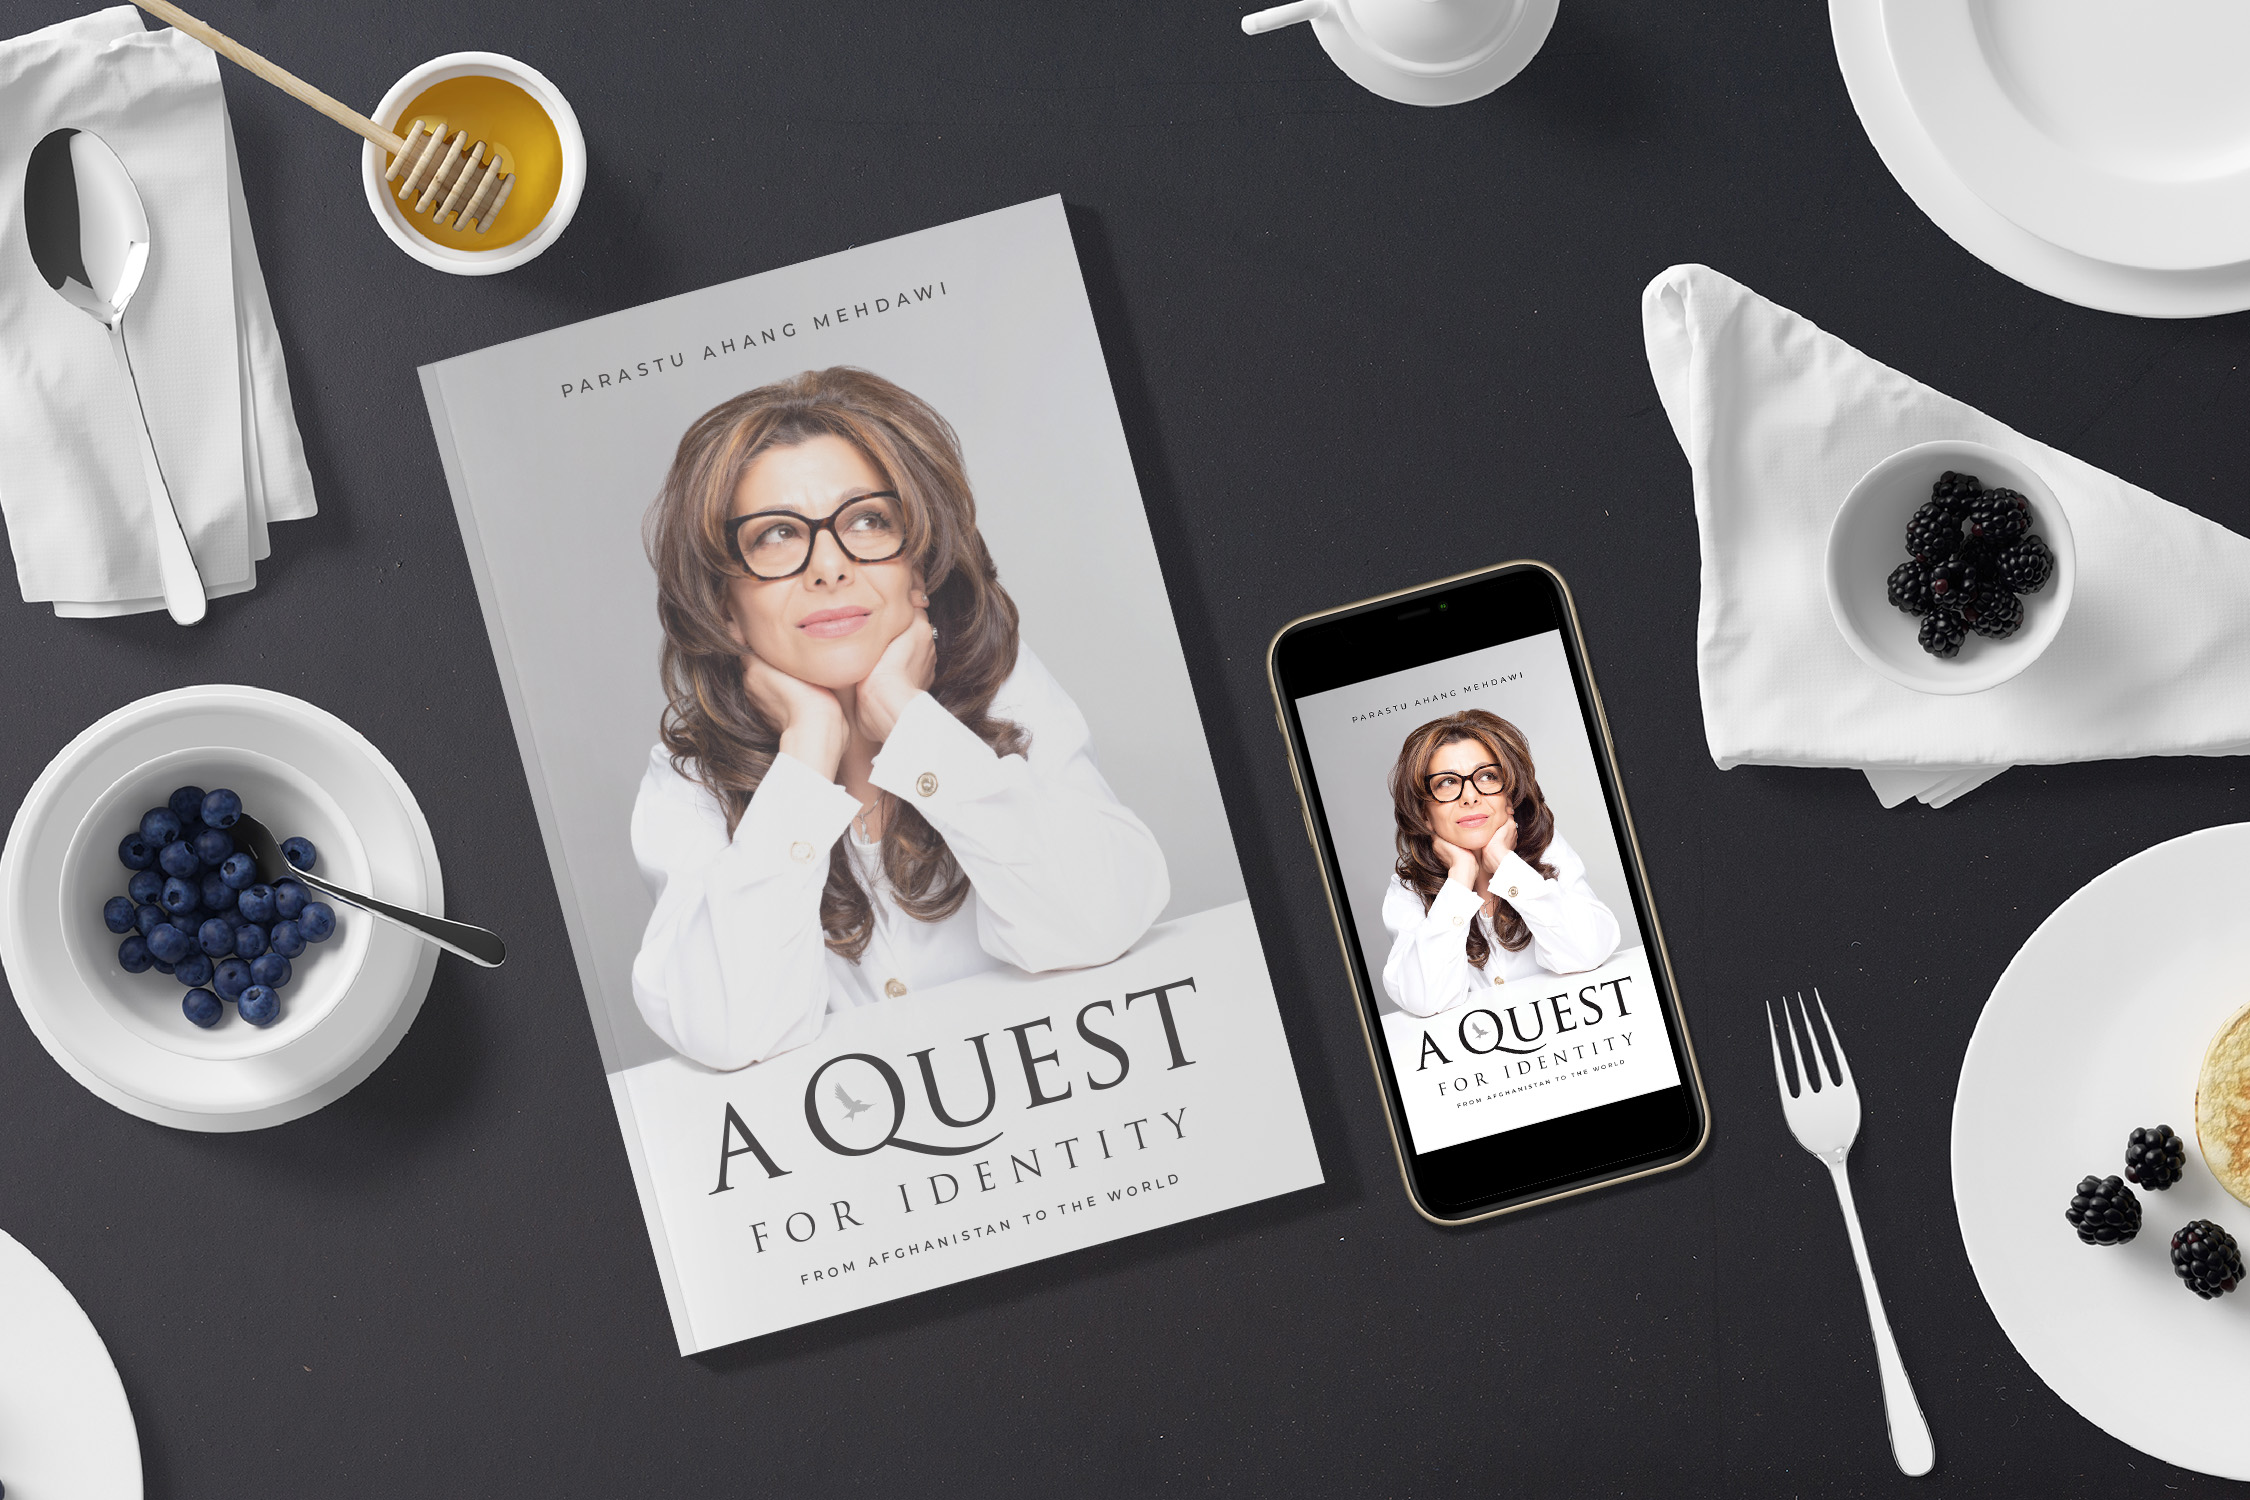 A Quest for Identity ebook and hardcover